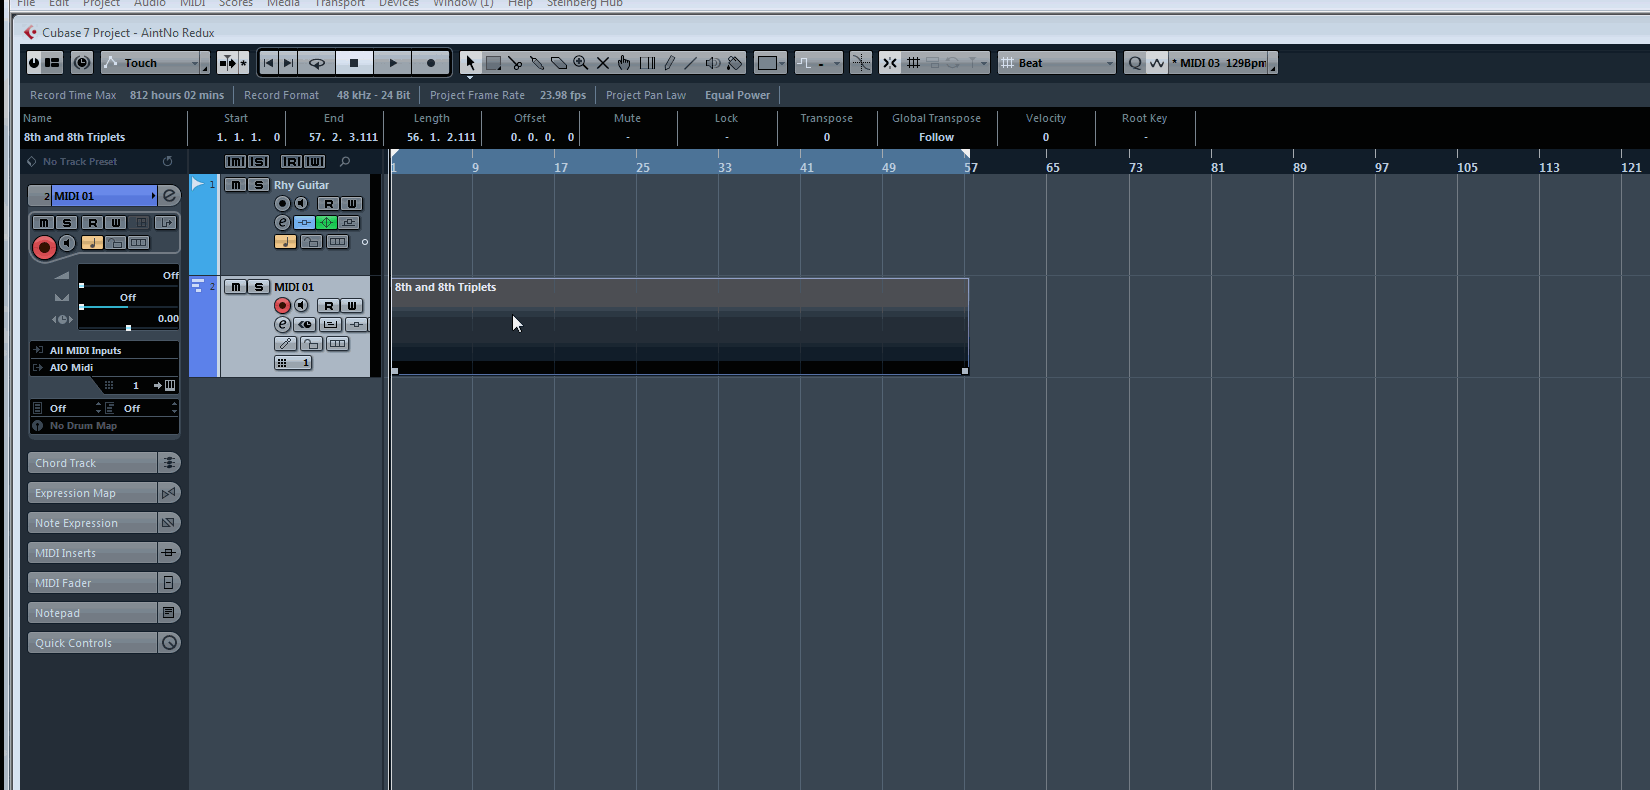 Cubase Tips: 8th and Triplets